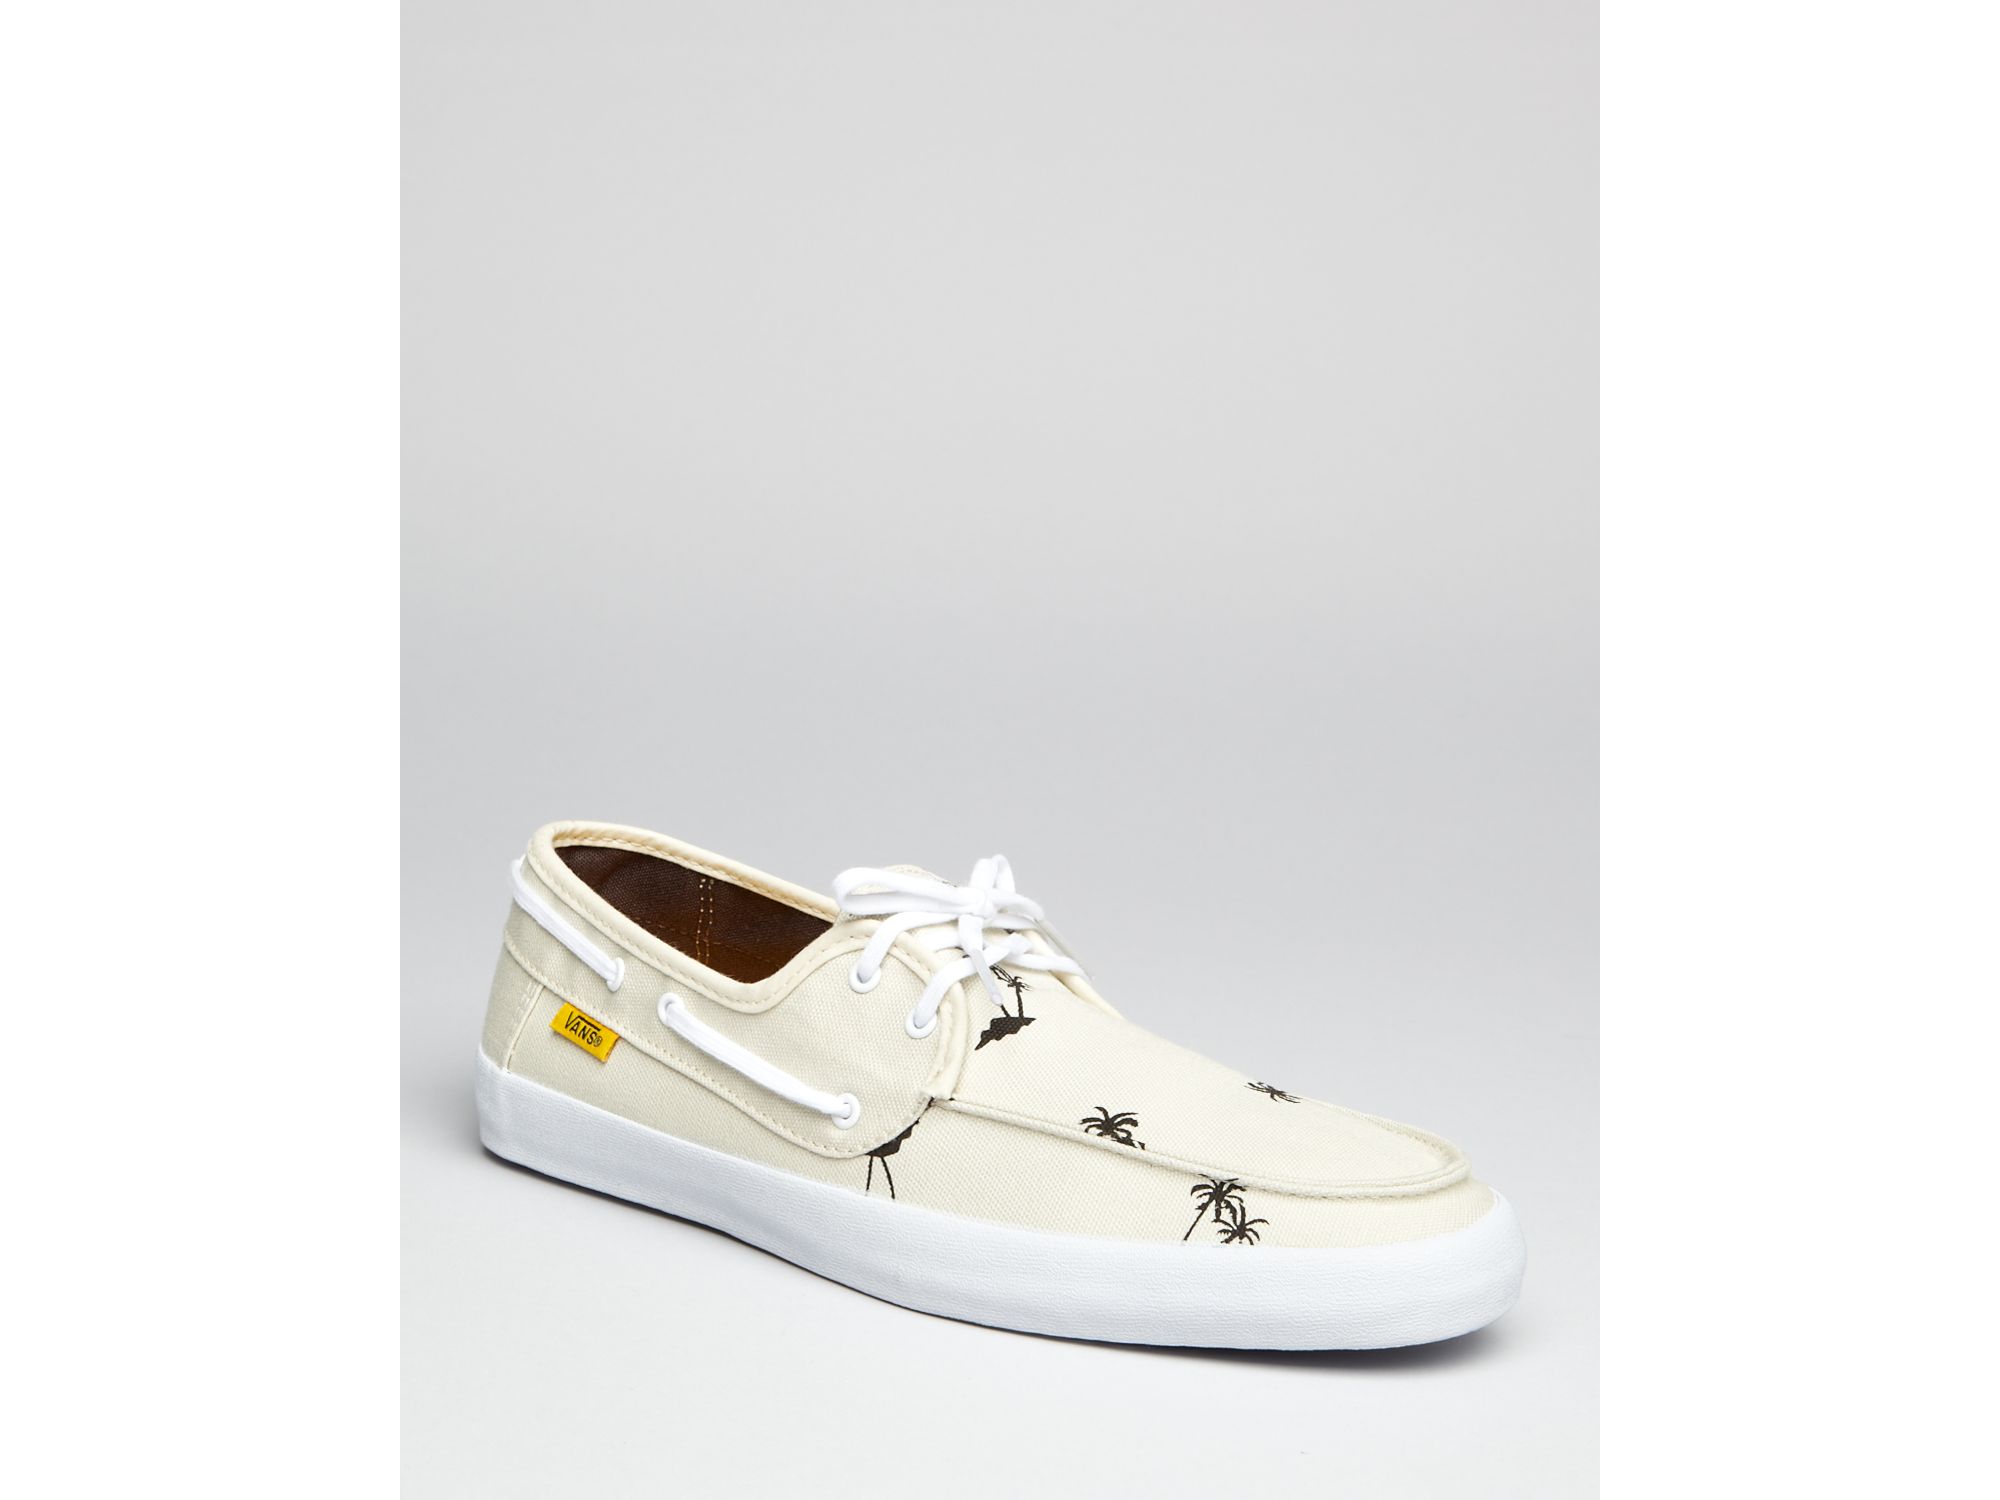 Surf Palm Sneakers in Antique (Natural) for Men - Lyst